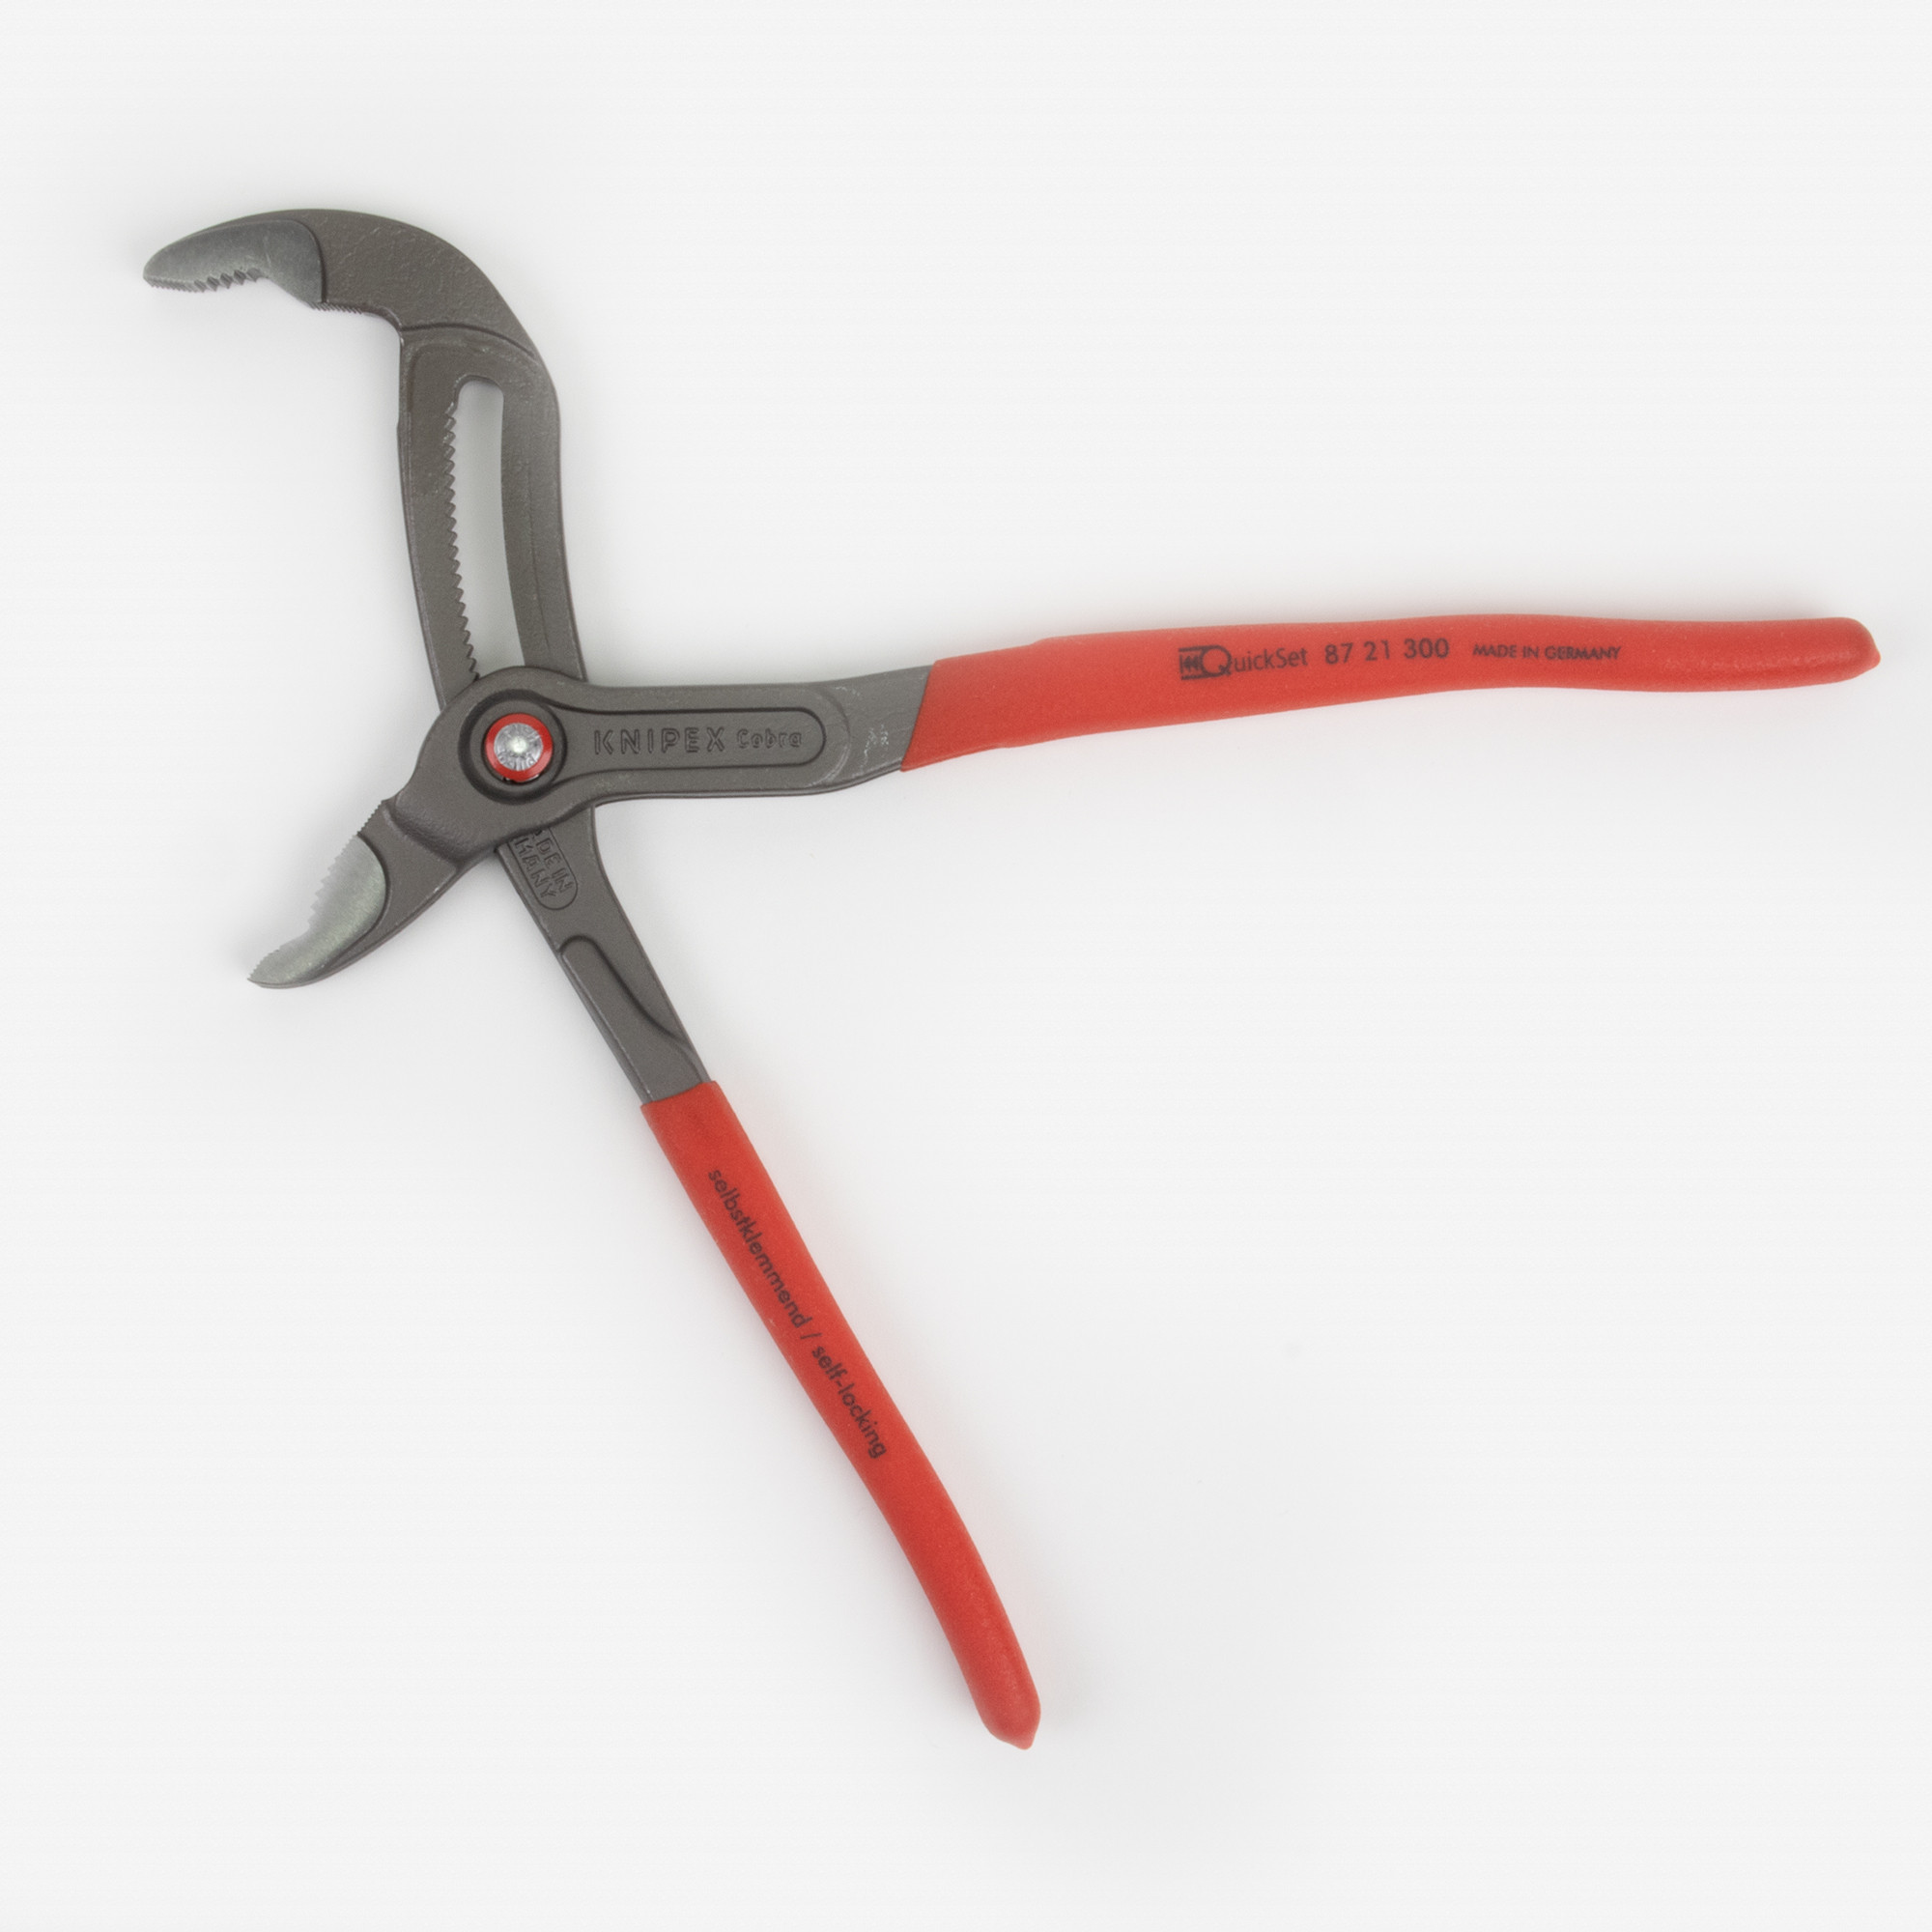 KNIPEX Tools - Cobra Water Pump Pliers (8701150), 6-Inch,Red